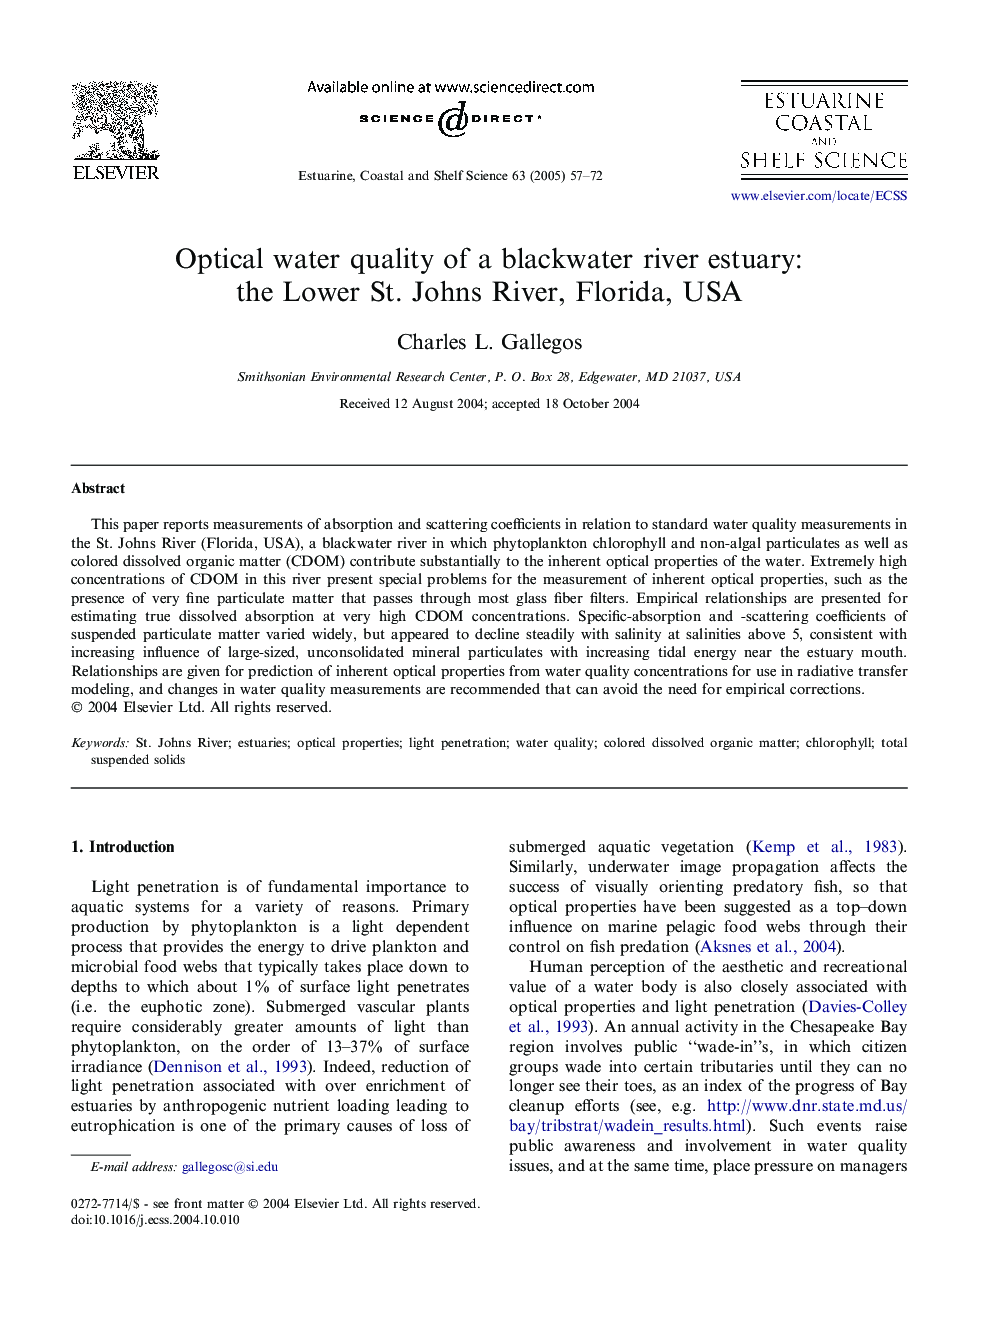 Optical water quality of a blackwater river estuary: the Lower St. Johns River, Florida, USA